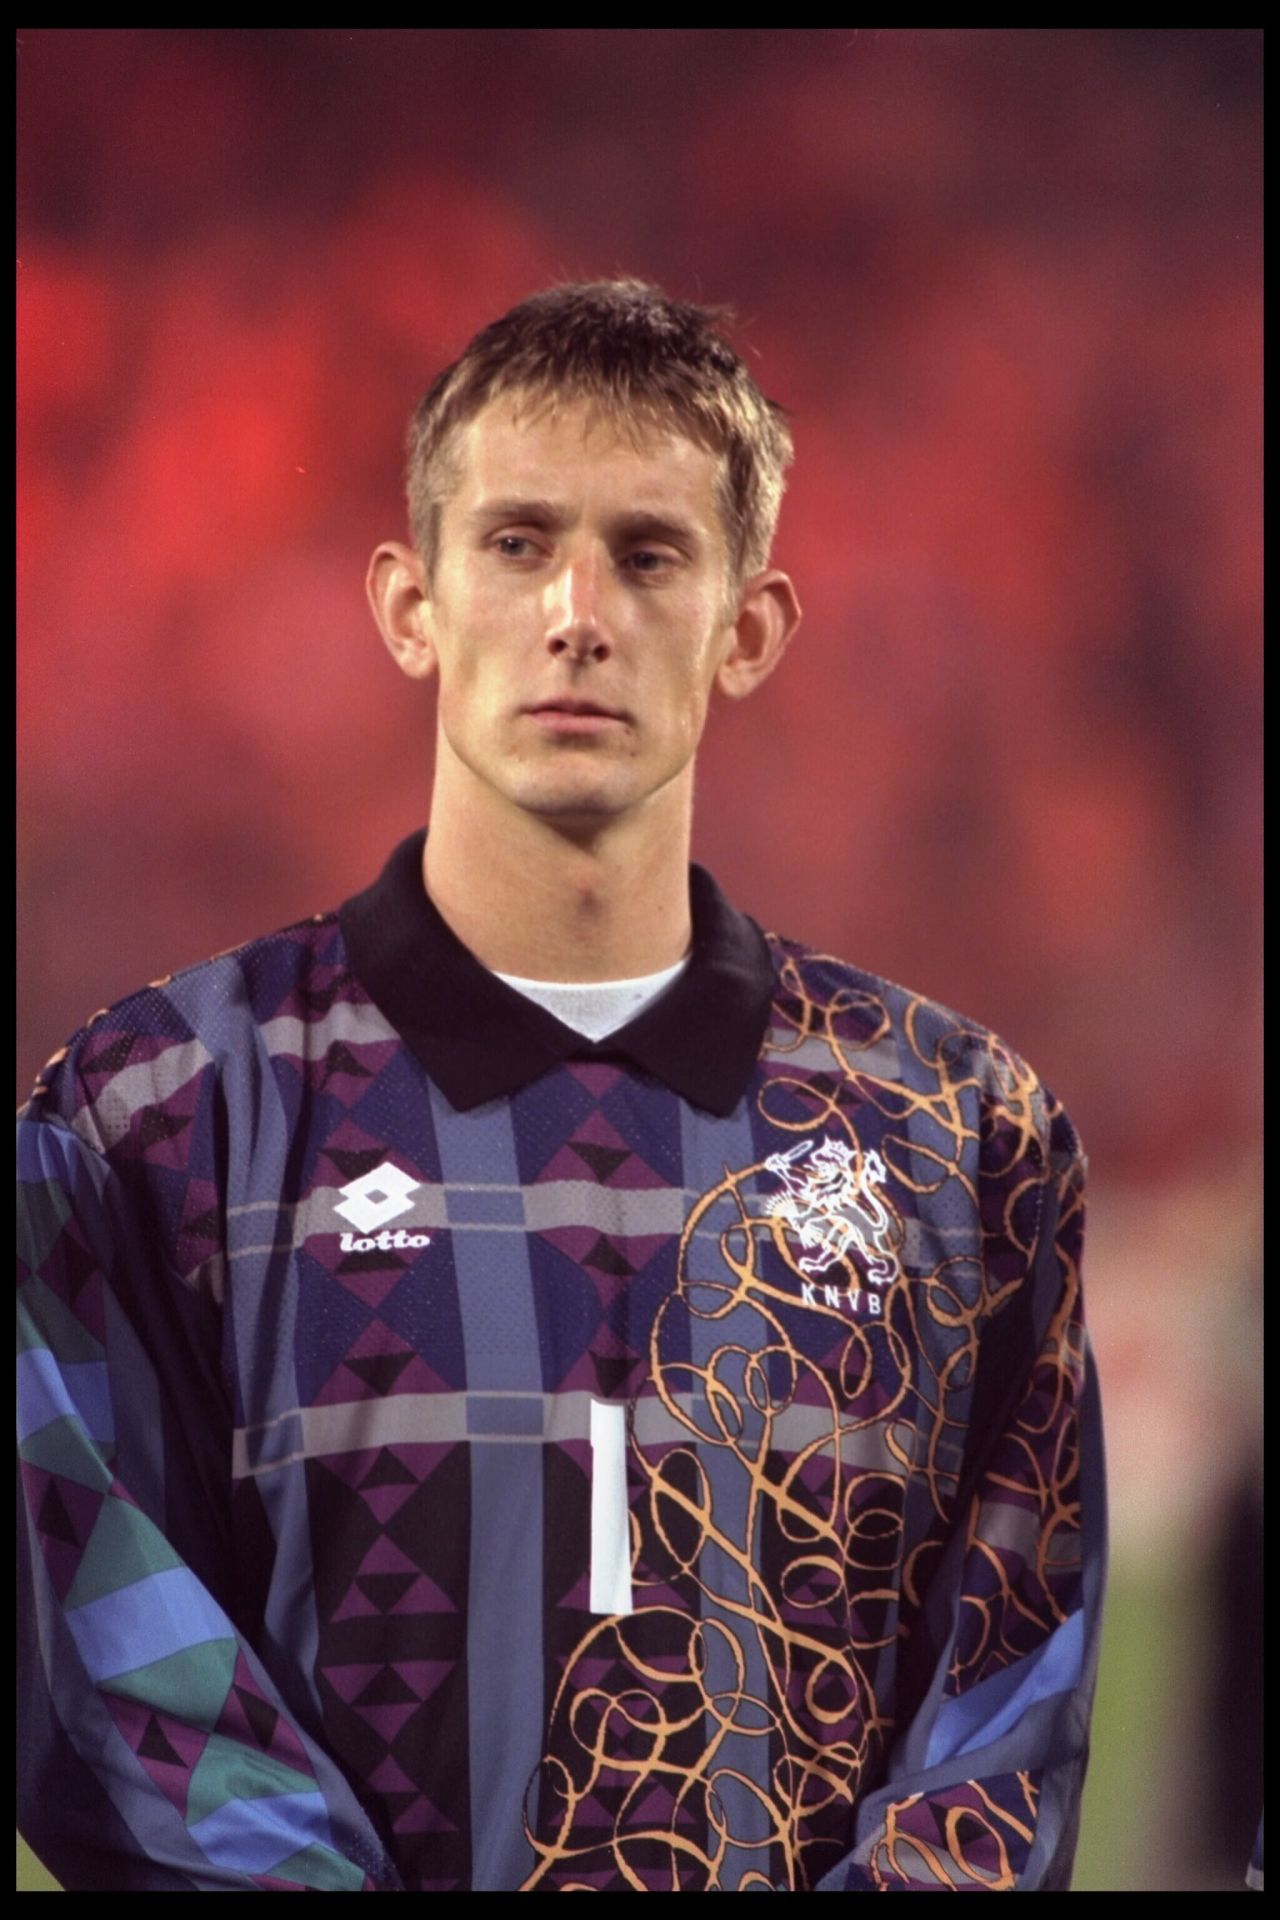 Part of the young Ajax team that conquered European in 1995, goalkeeper Van Der Sar wanted to give something back to the club. He now works as the club's marketing director.